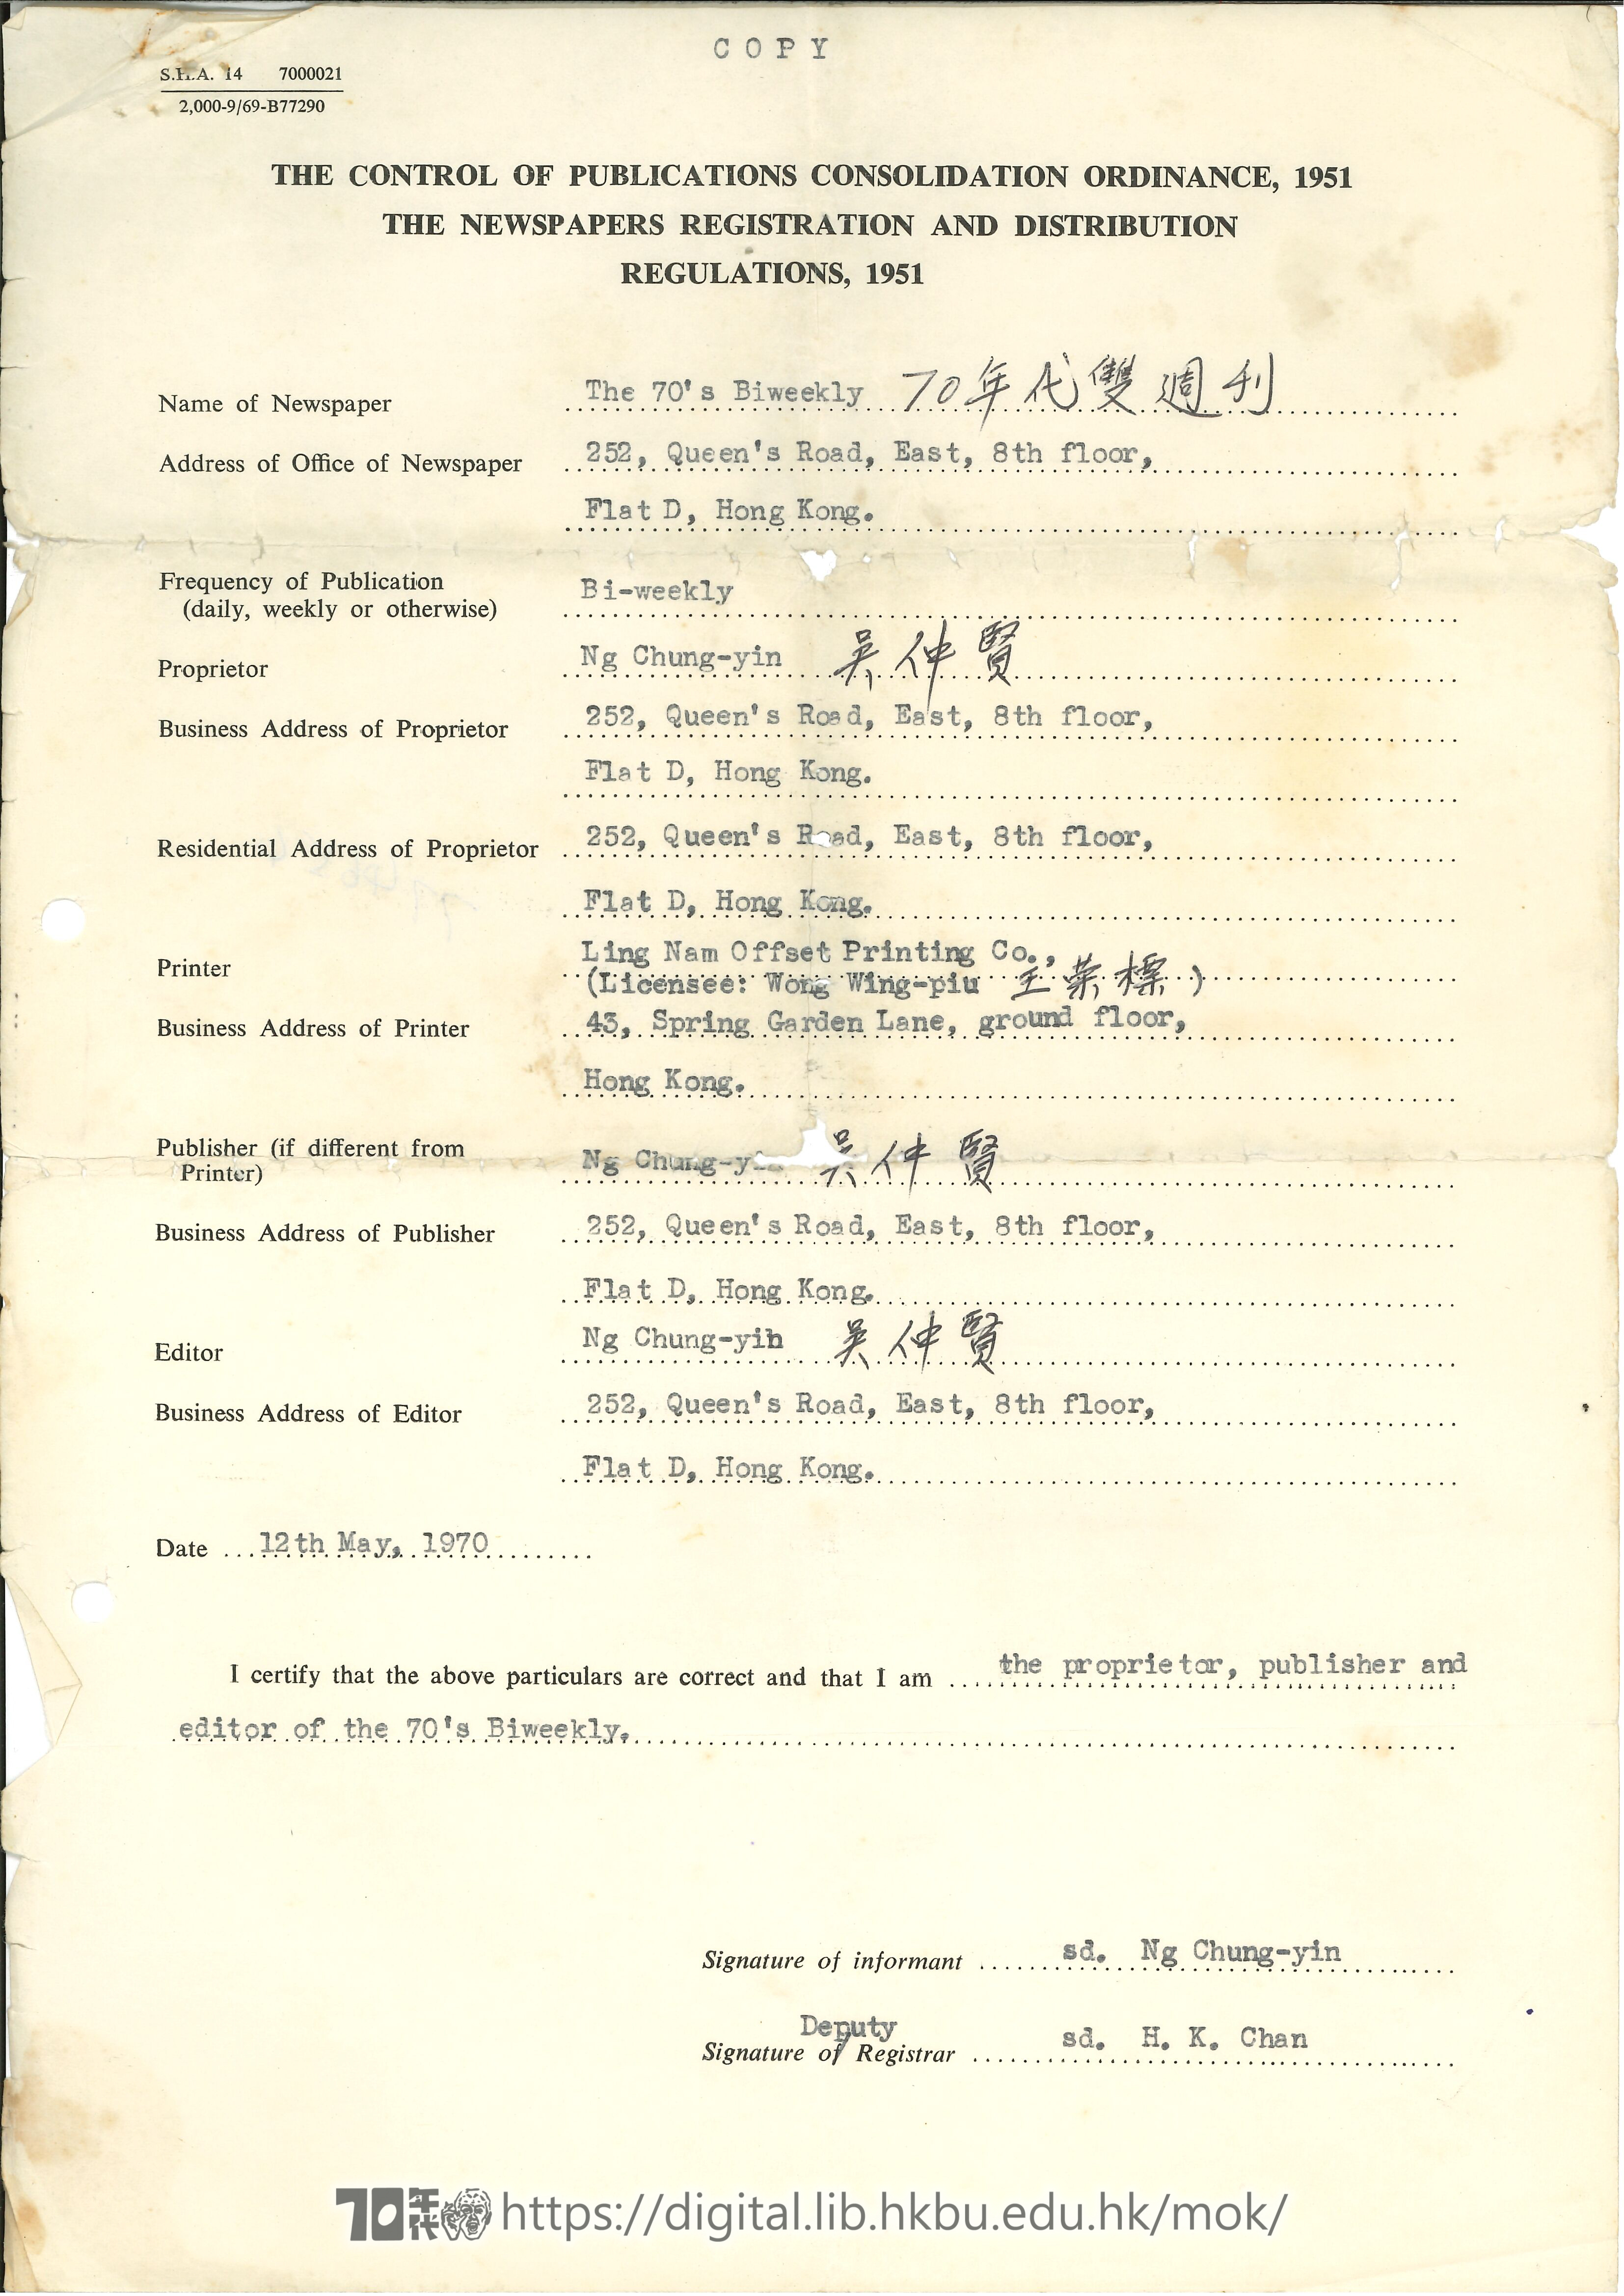   Confirmation of registration details of The 70’s Biweekly signed by Ng Chung Yin  